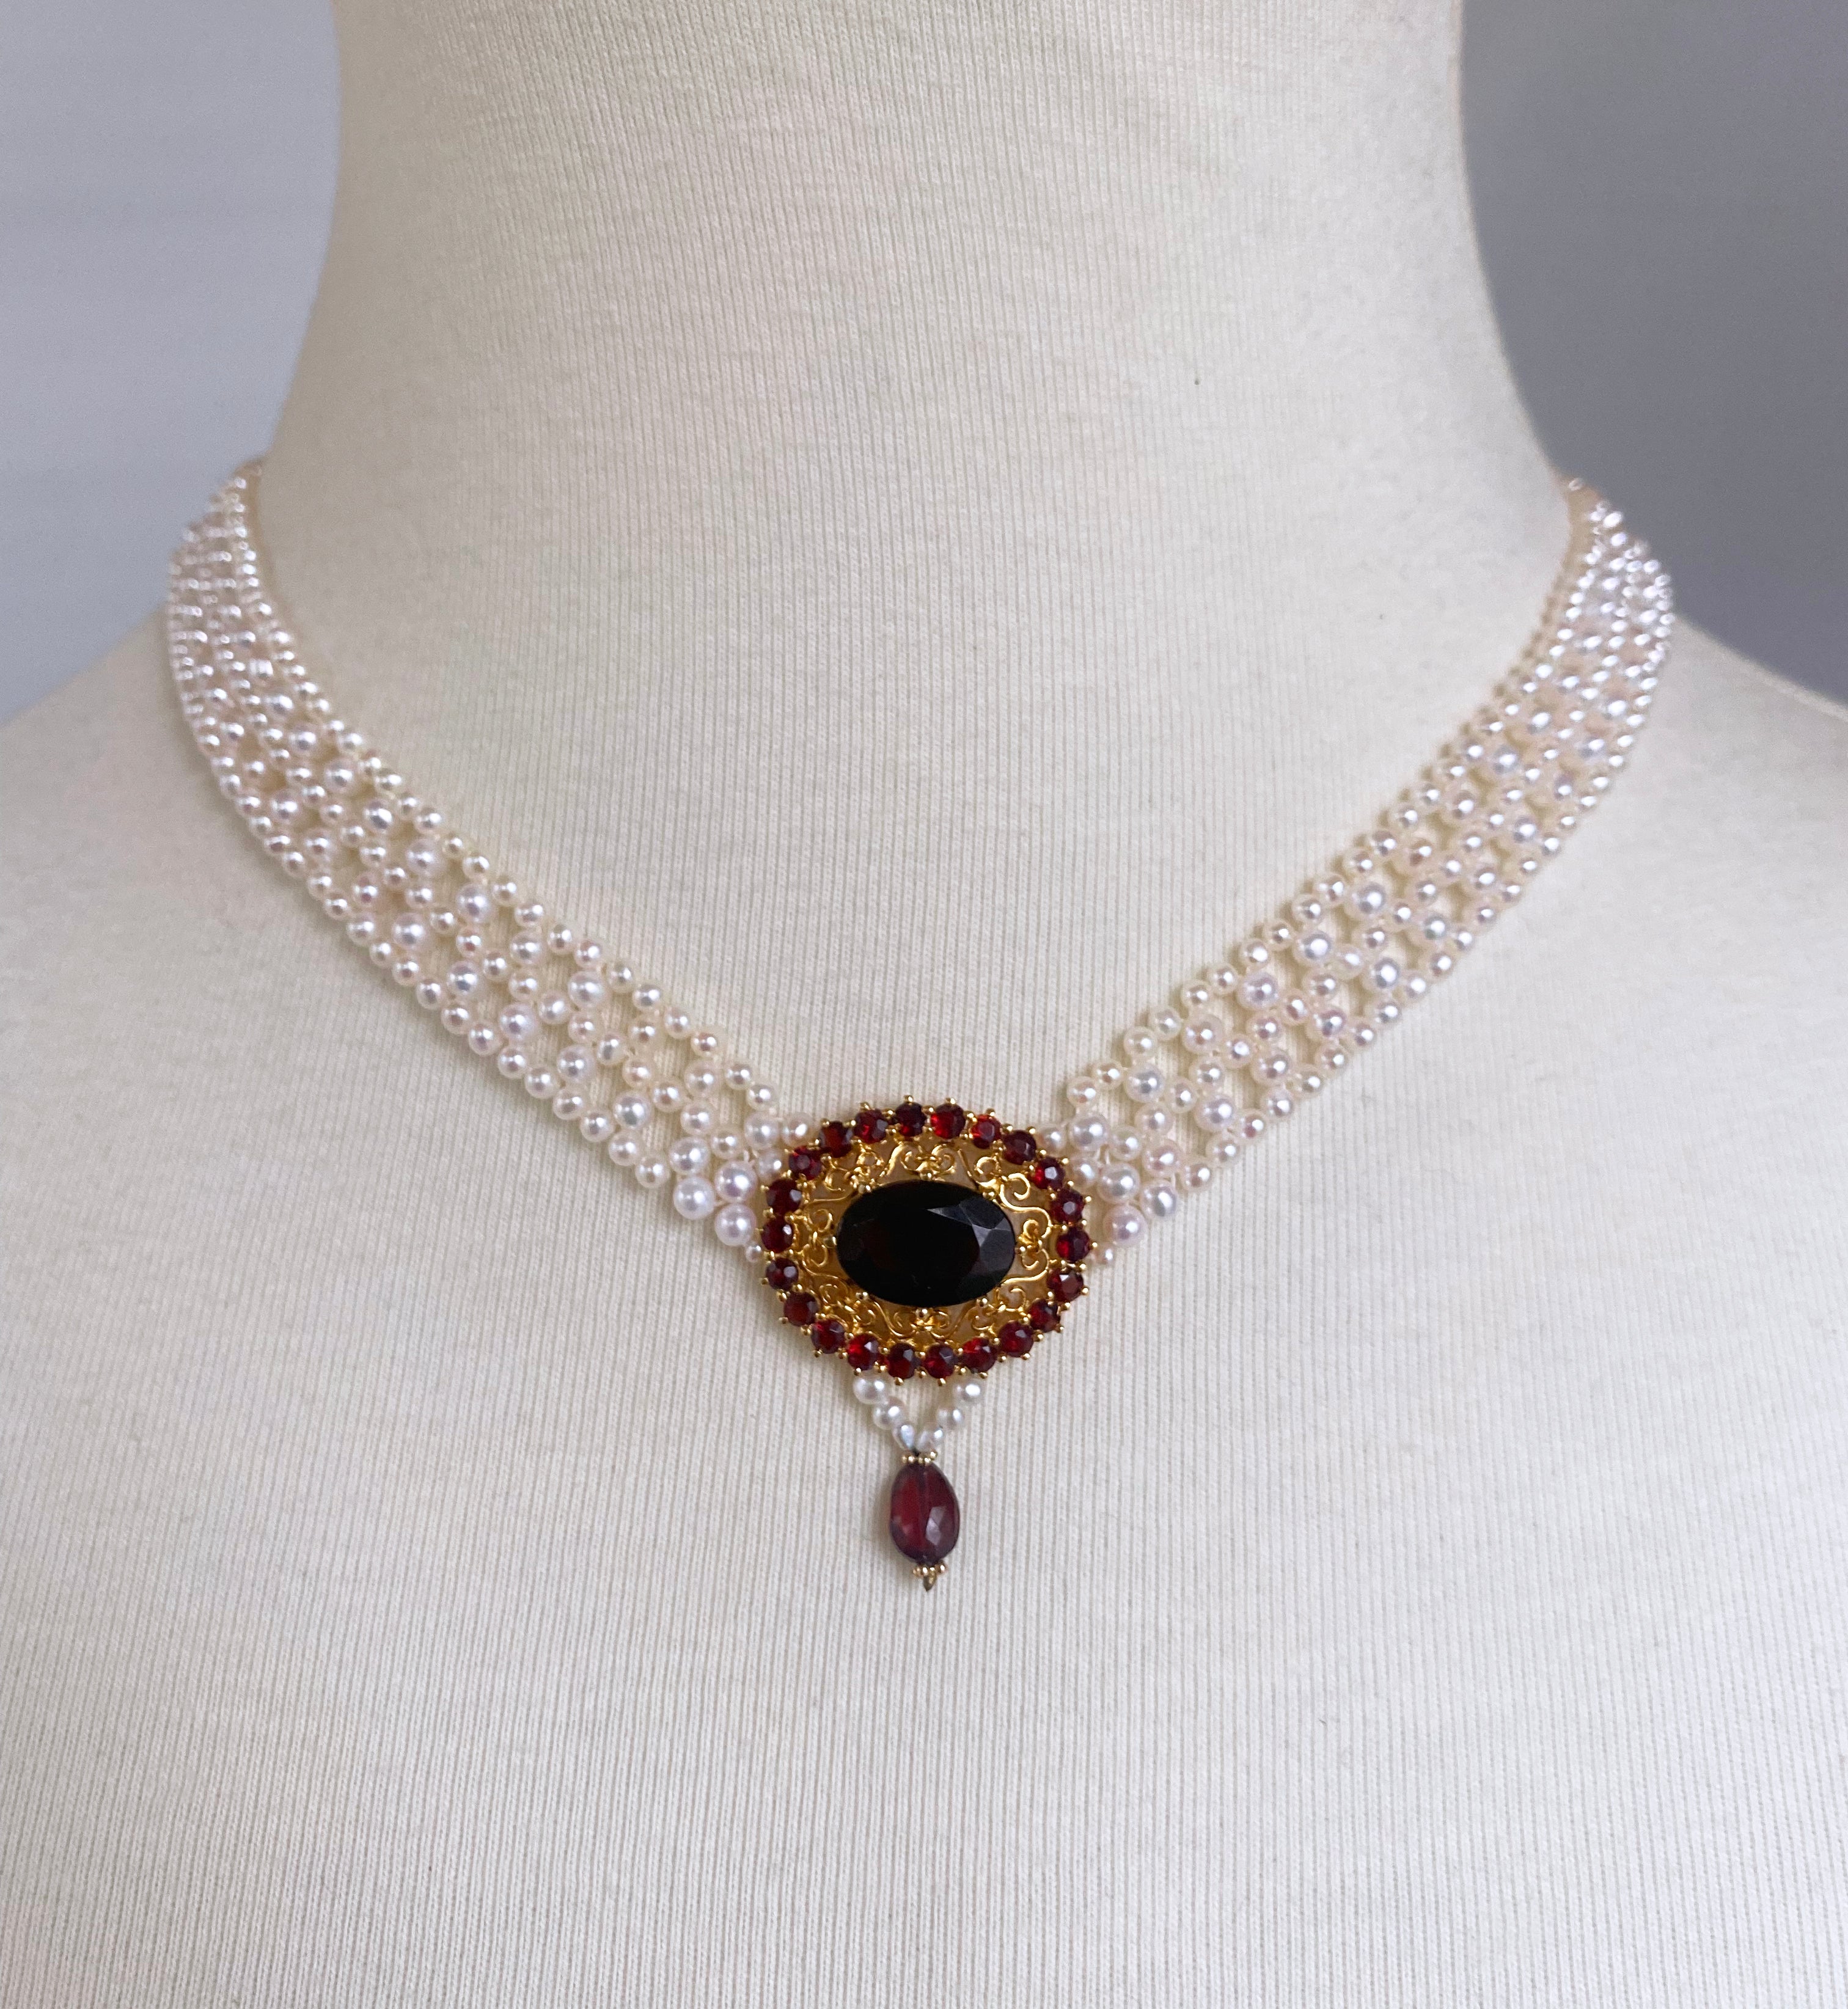 Beautiful 'V' necklace by Marina J. This piece has reworked a vintage Garnet brooch into a wonderful necklace Centerpiece. The brooch features a large Garnet stone bordered by brilliantly pigmented Cushion cut Garnets, all set on a Gold Plated